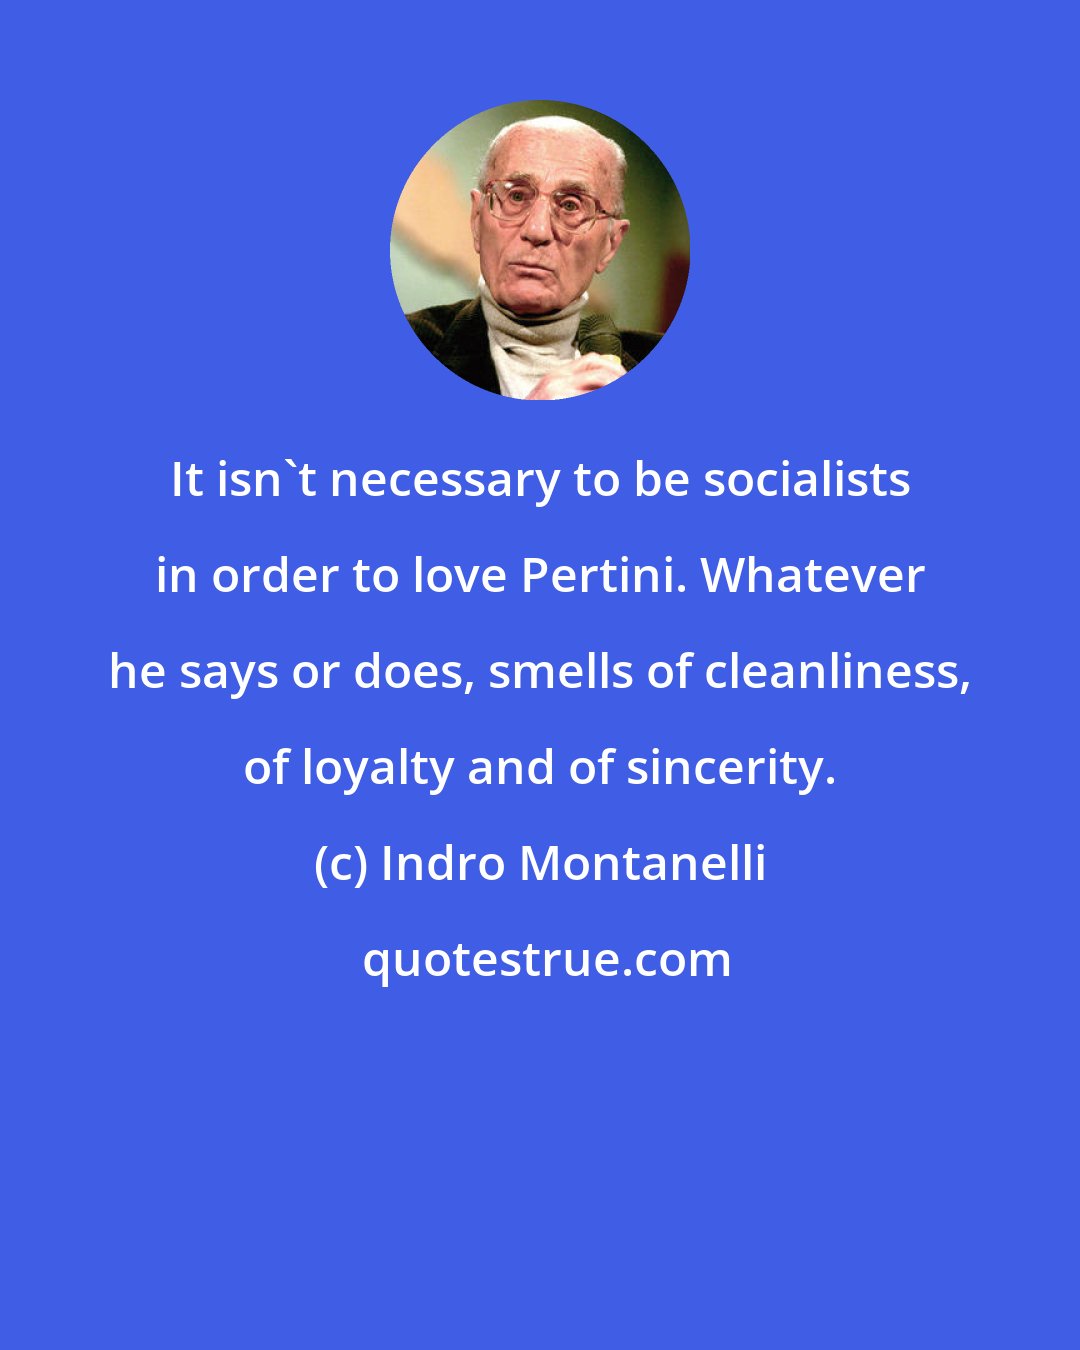 Indro Montanelli: It isn't necessary to be socialists in order to love Pertini. Whatever he says or does, smells of cleanliness, of loyalty and of sincerity.